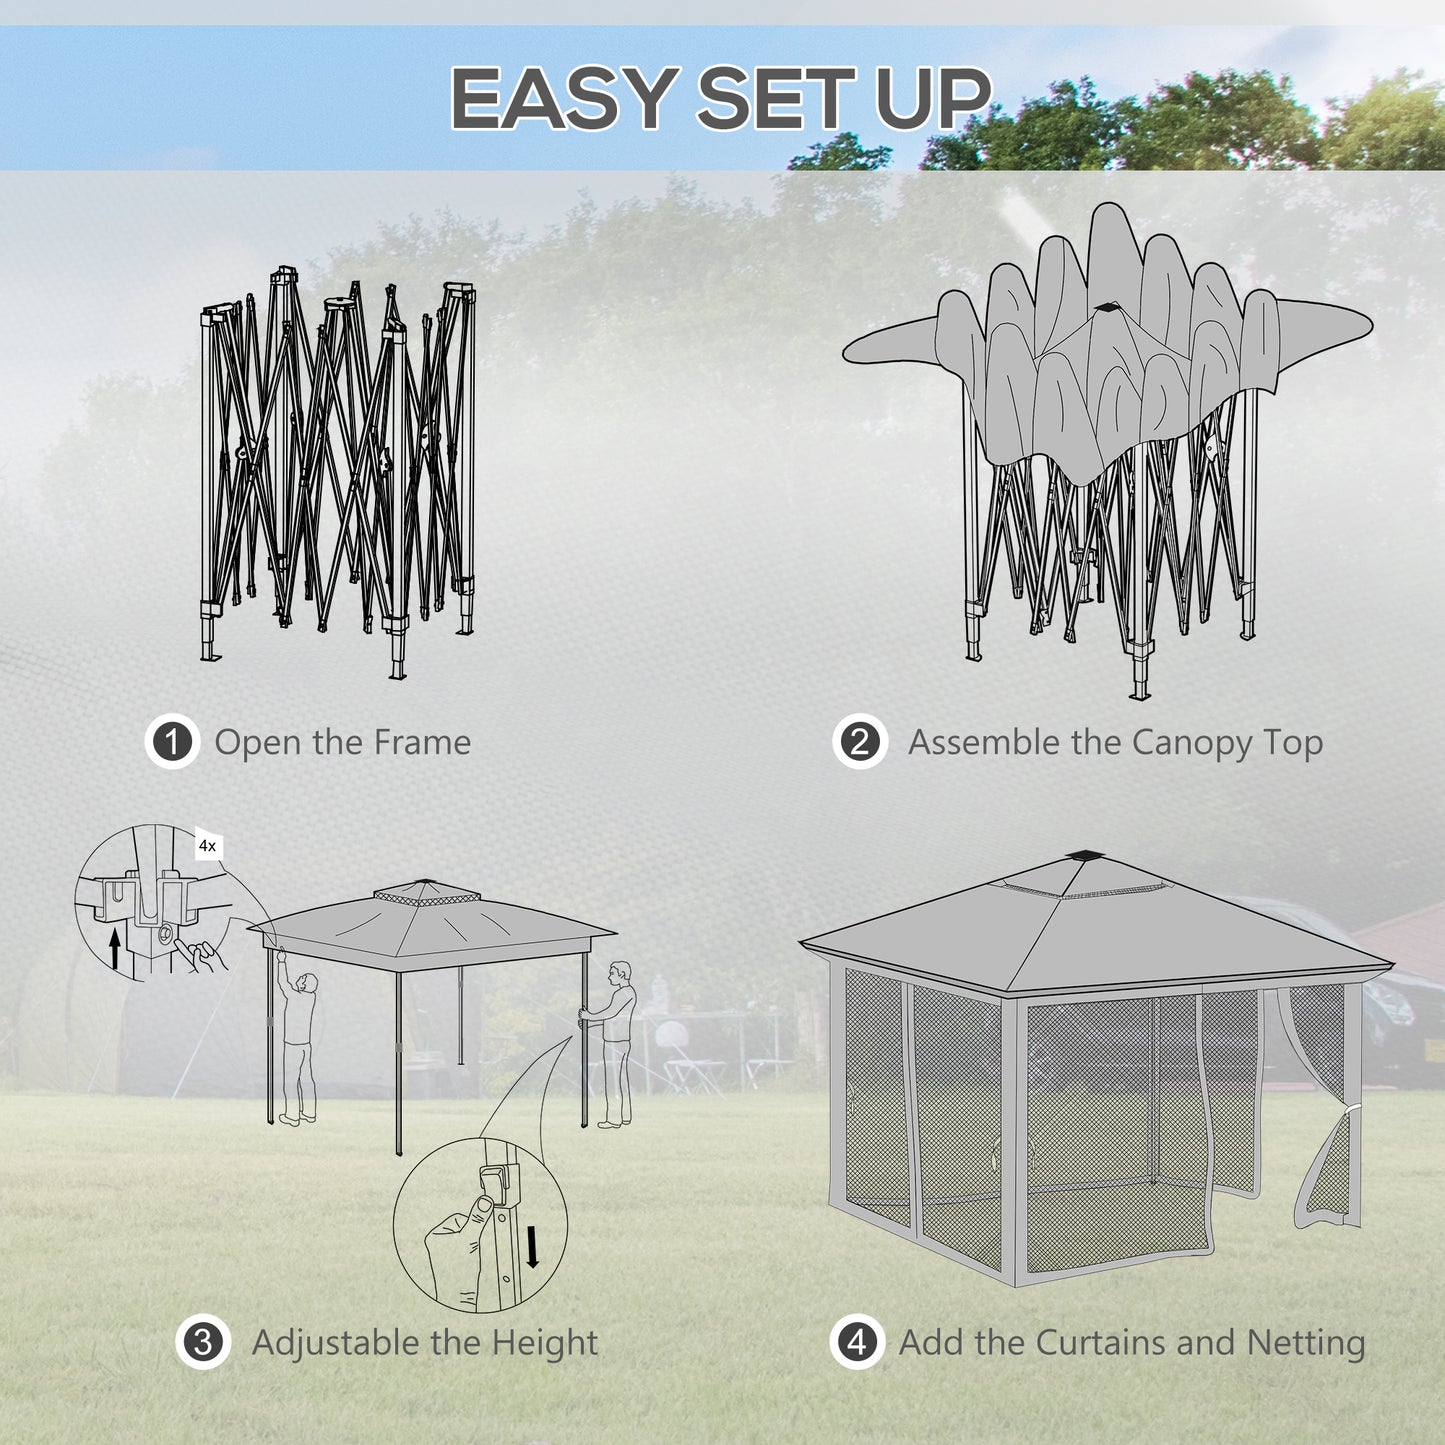 Outsunny 3 x 3(m) Pop Up Gazebo Party Tent with Solar-Powered LED Lights, Adjustable Event Shelter with Curtain, Netting, Khaki